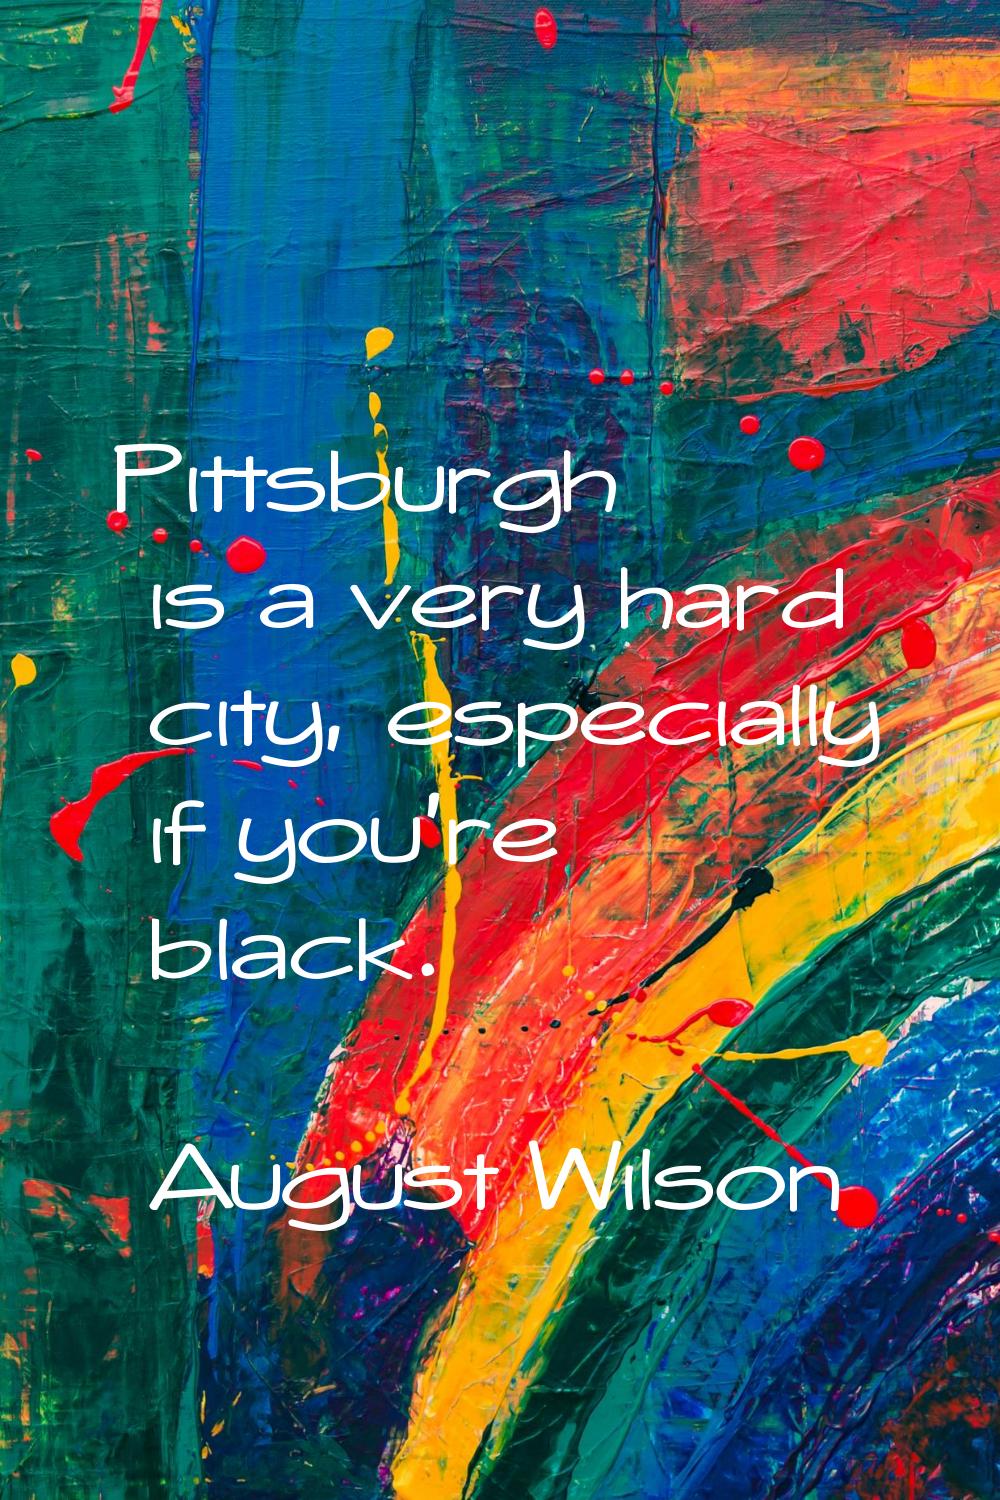 Pittsburgh is a very hard city, especially if you're black.